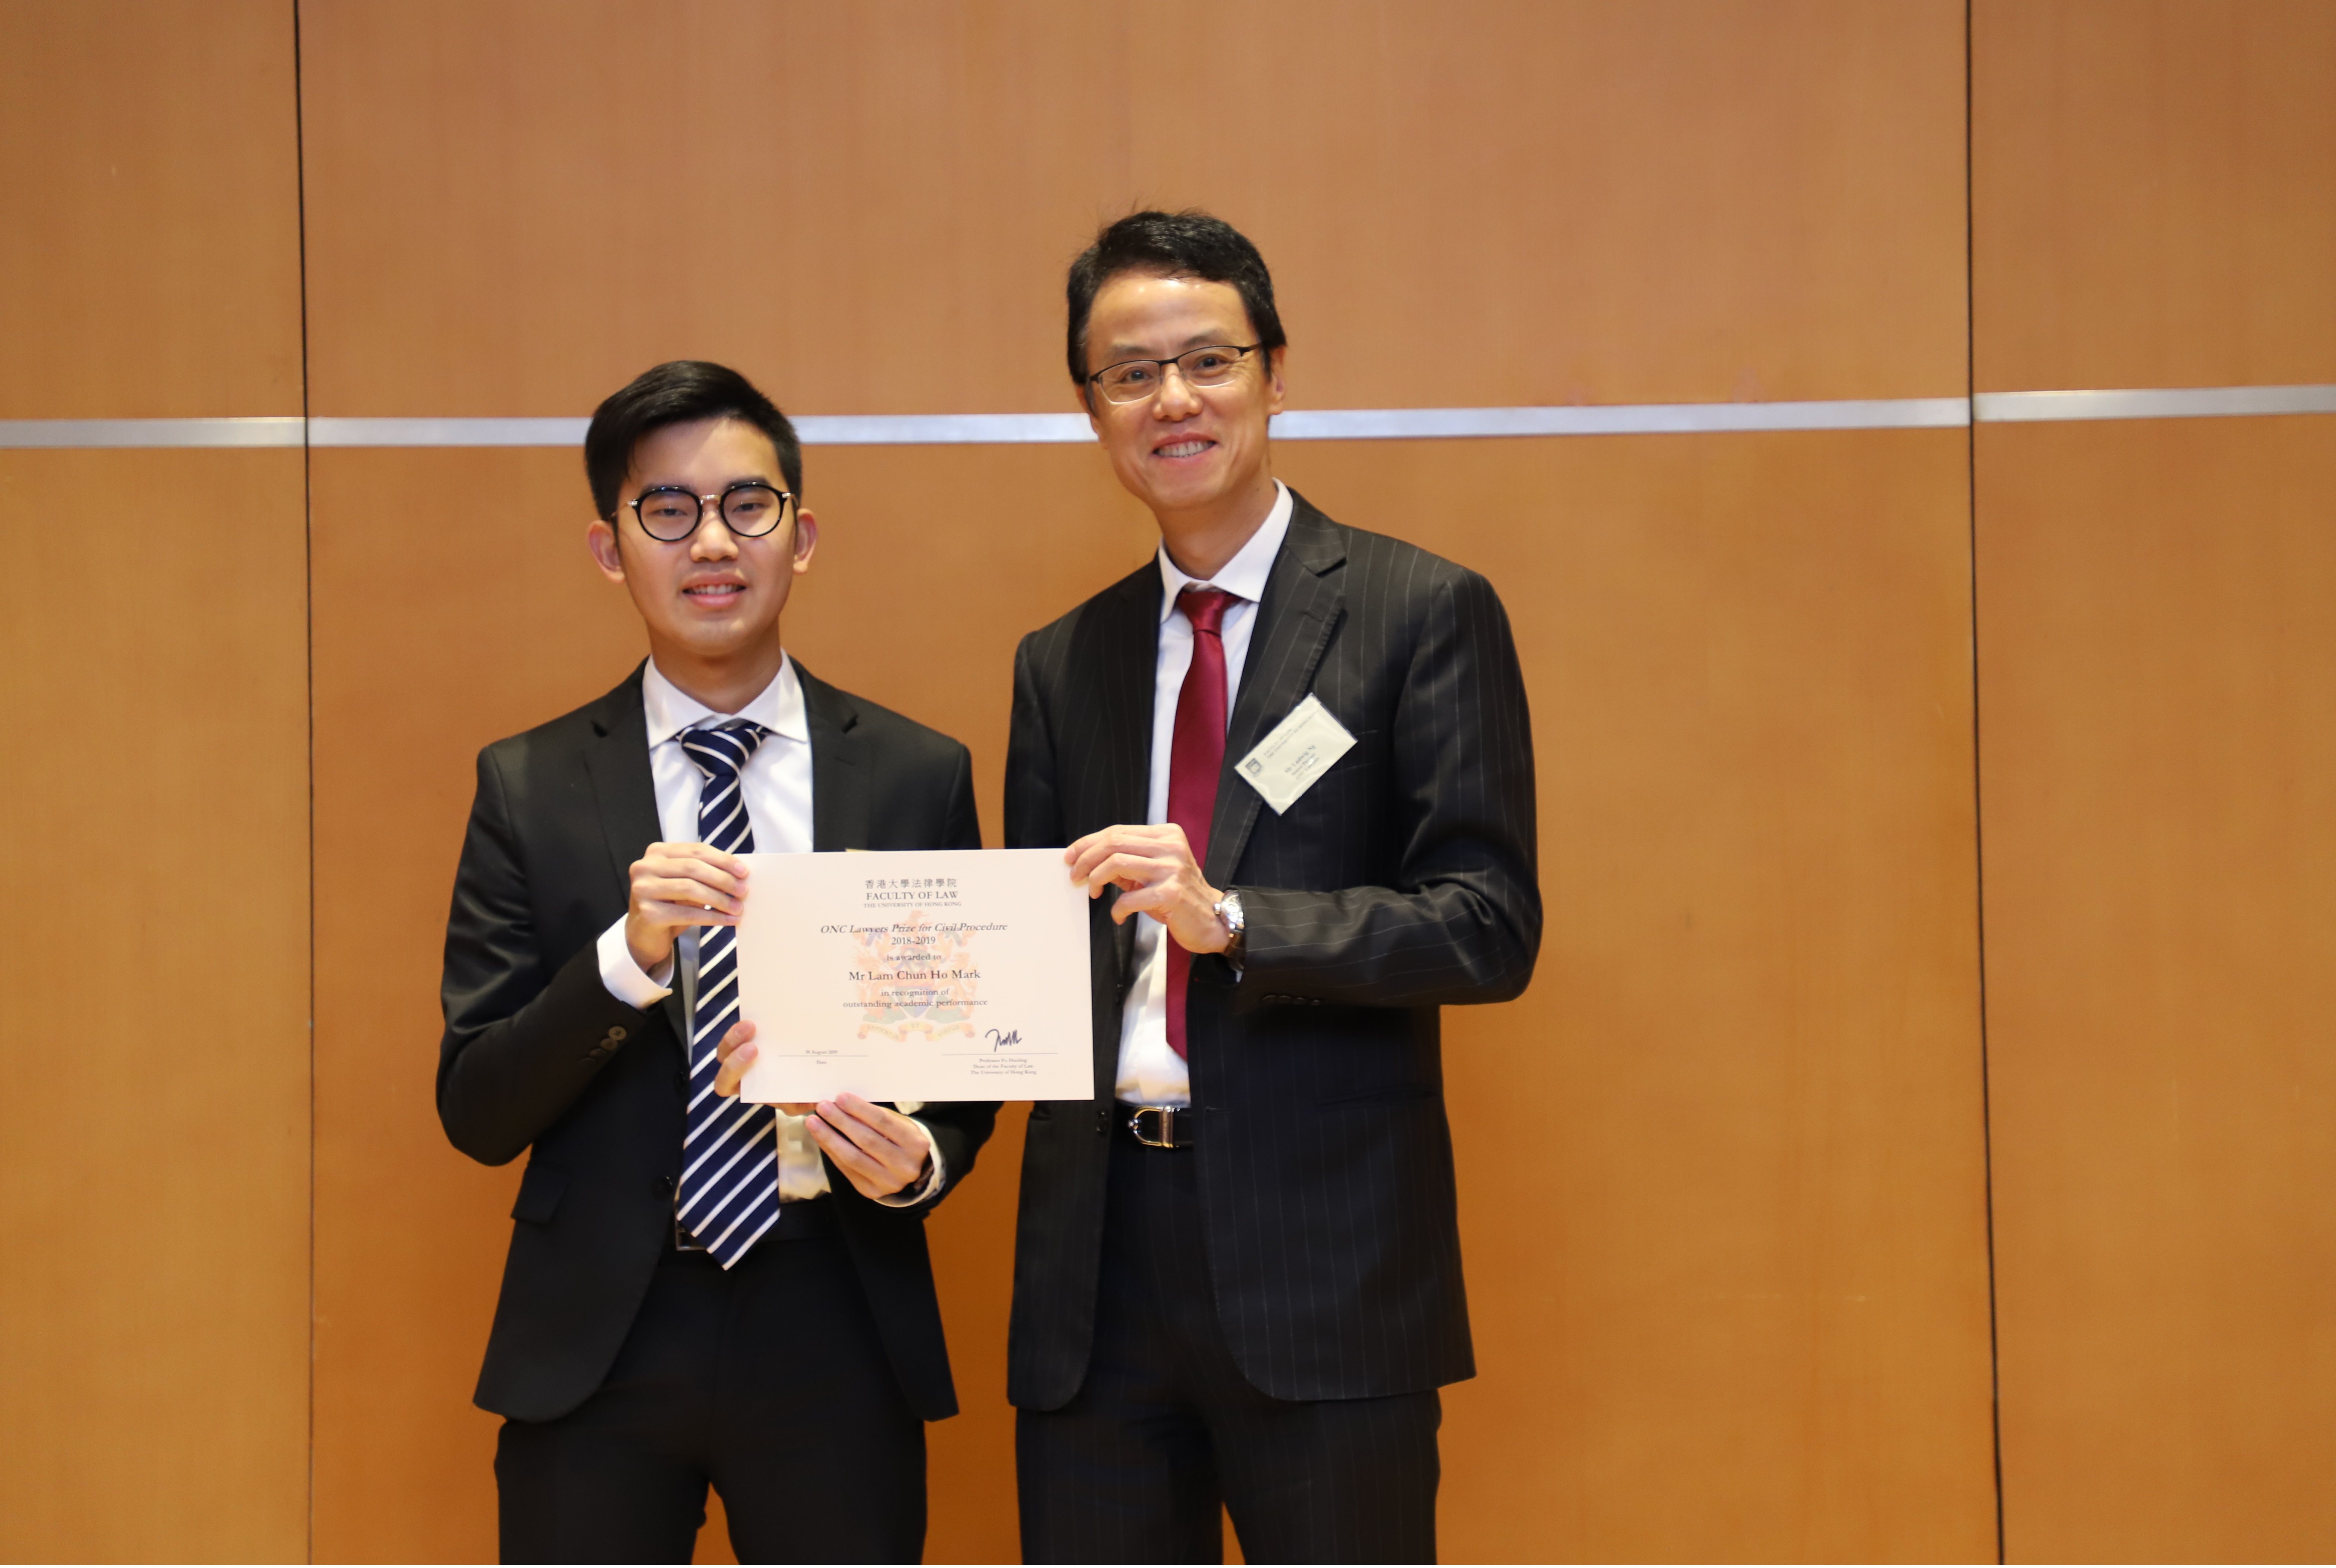 Mr Ludwig Ng presented the ONC Lawyers Prize for Civil Procedure 2018-19